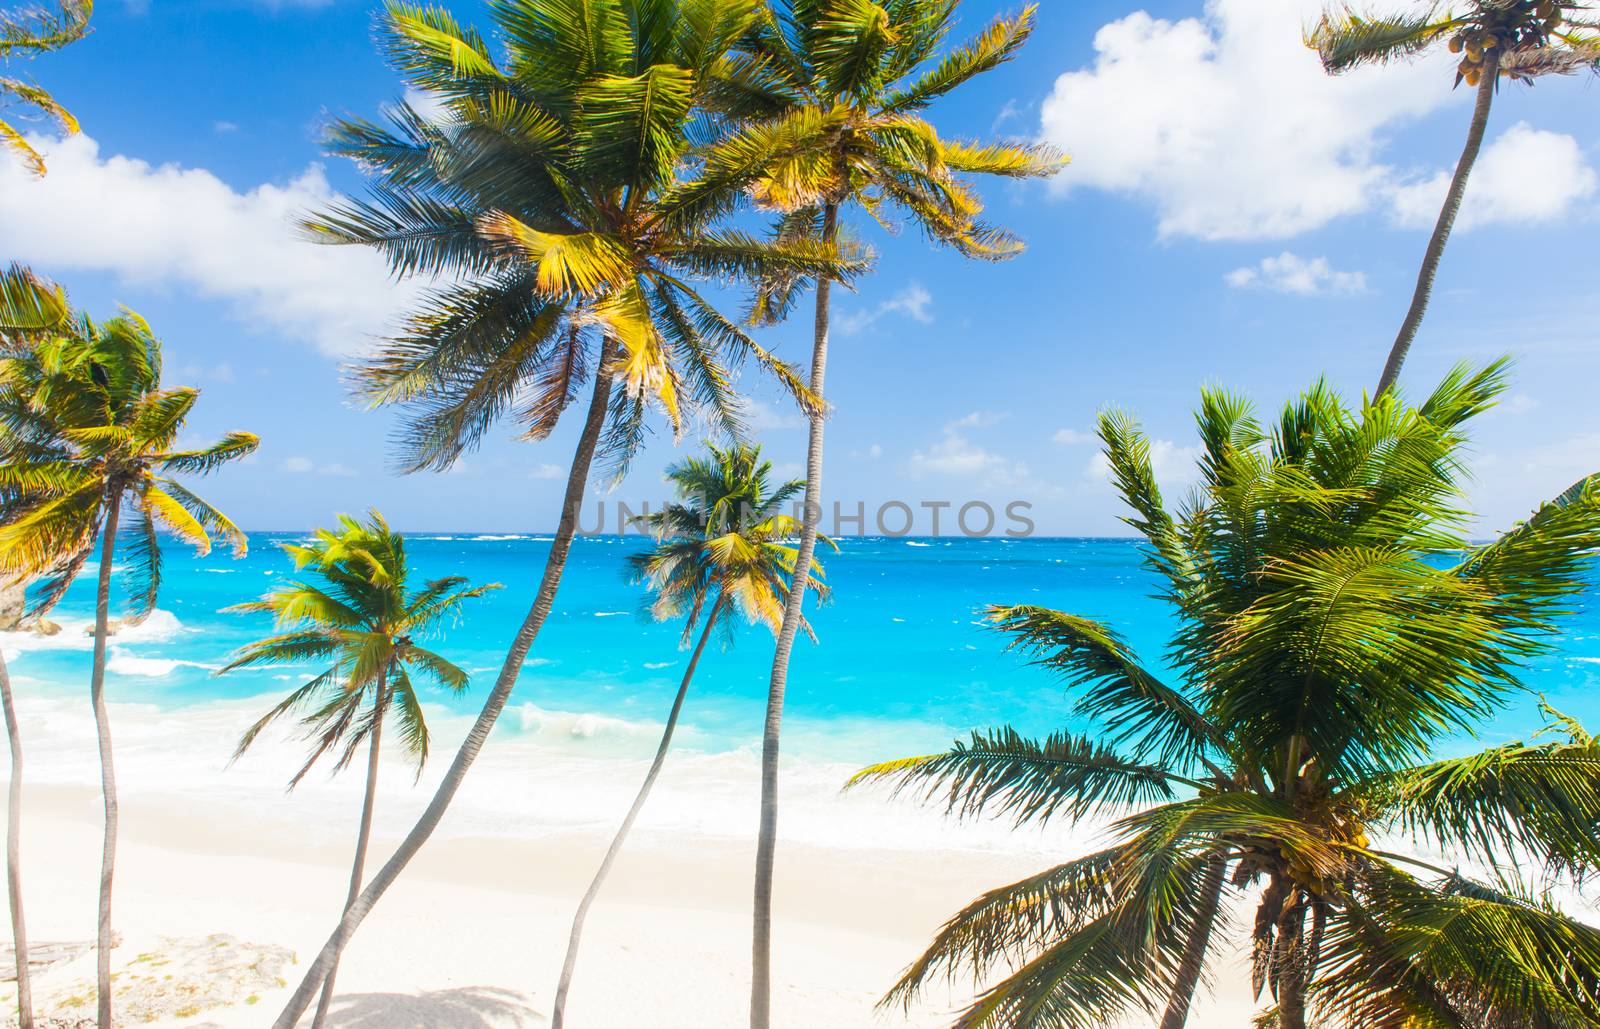 Bottom Bay is one of the most beautiful beaches on the Caribbean island of Barbados. It is a tropical paradise with palms hanging over turquoise sea